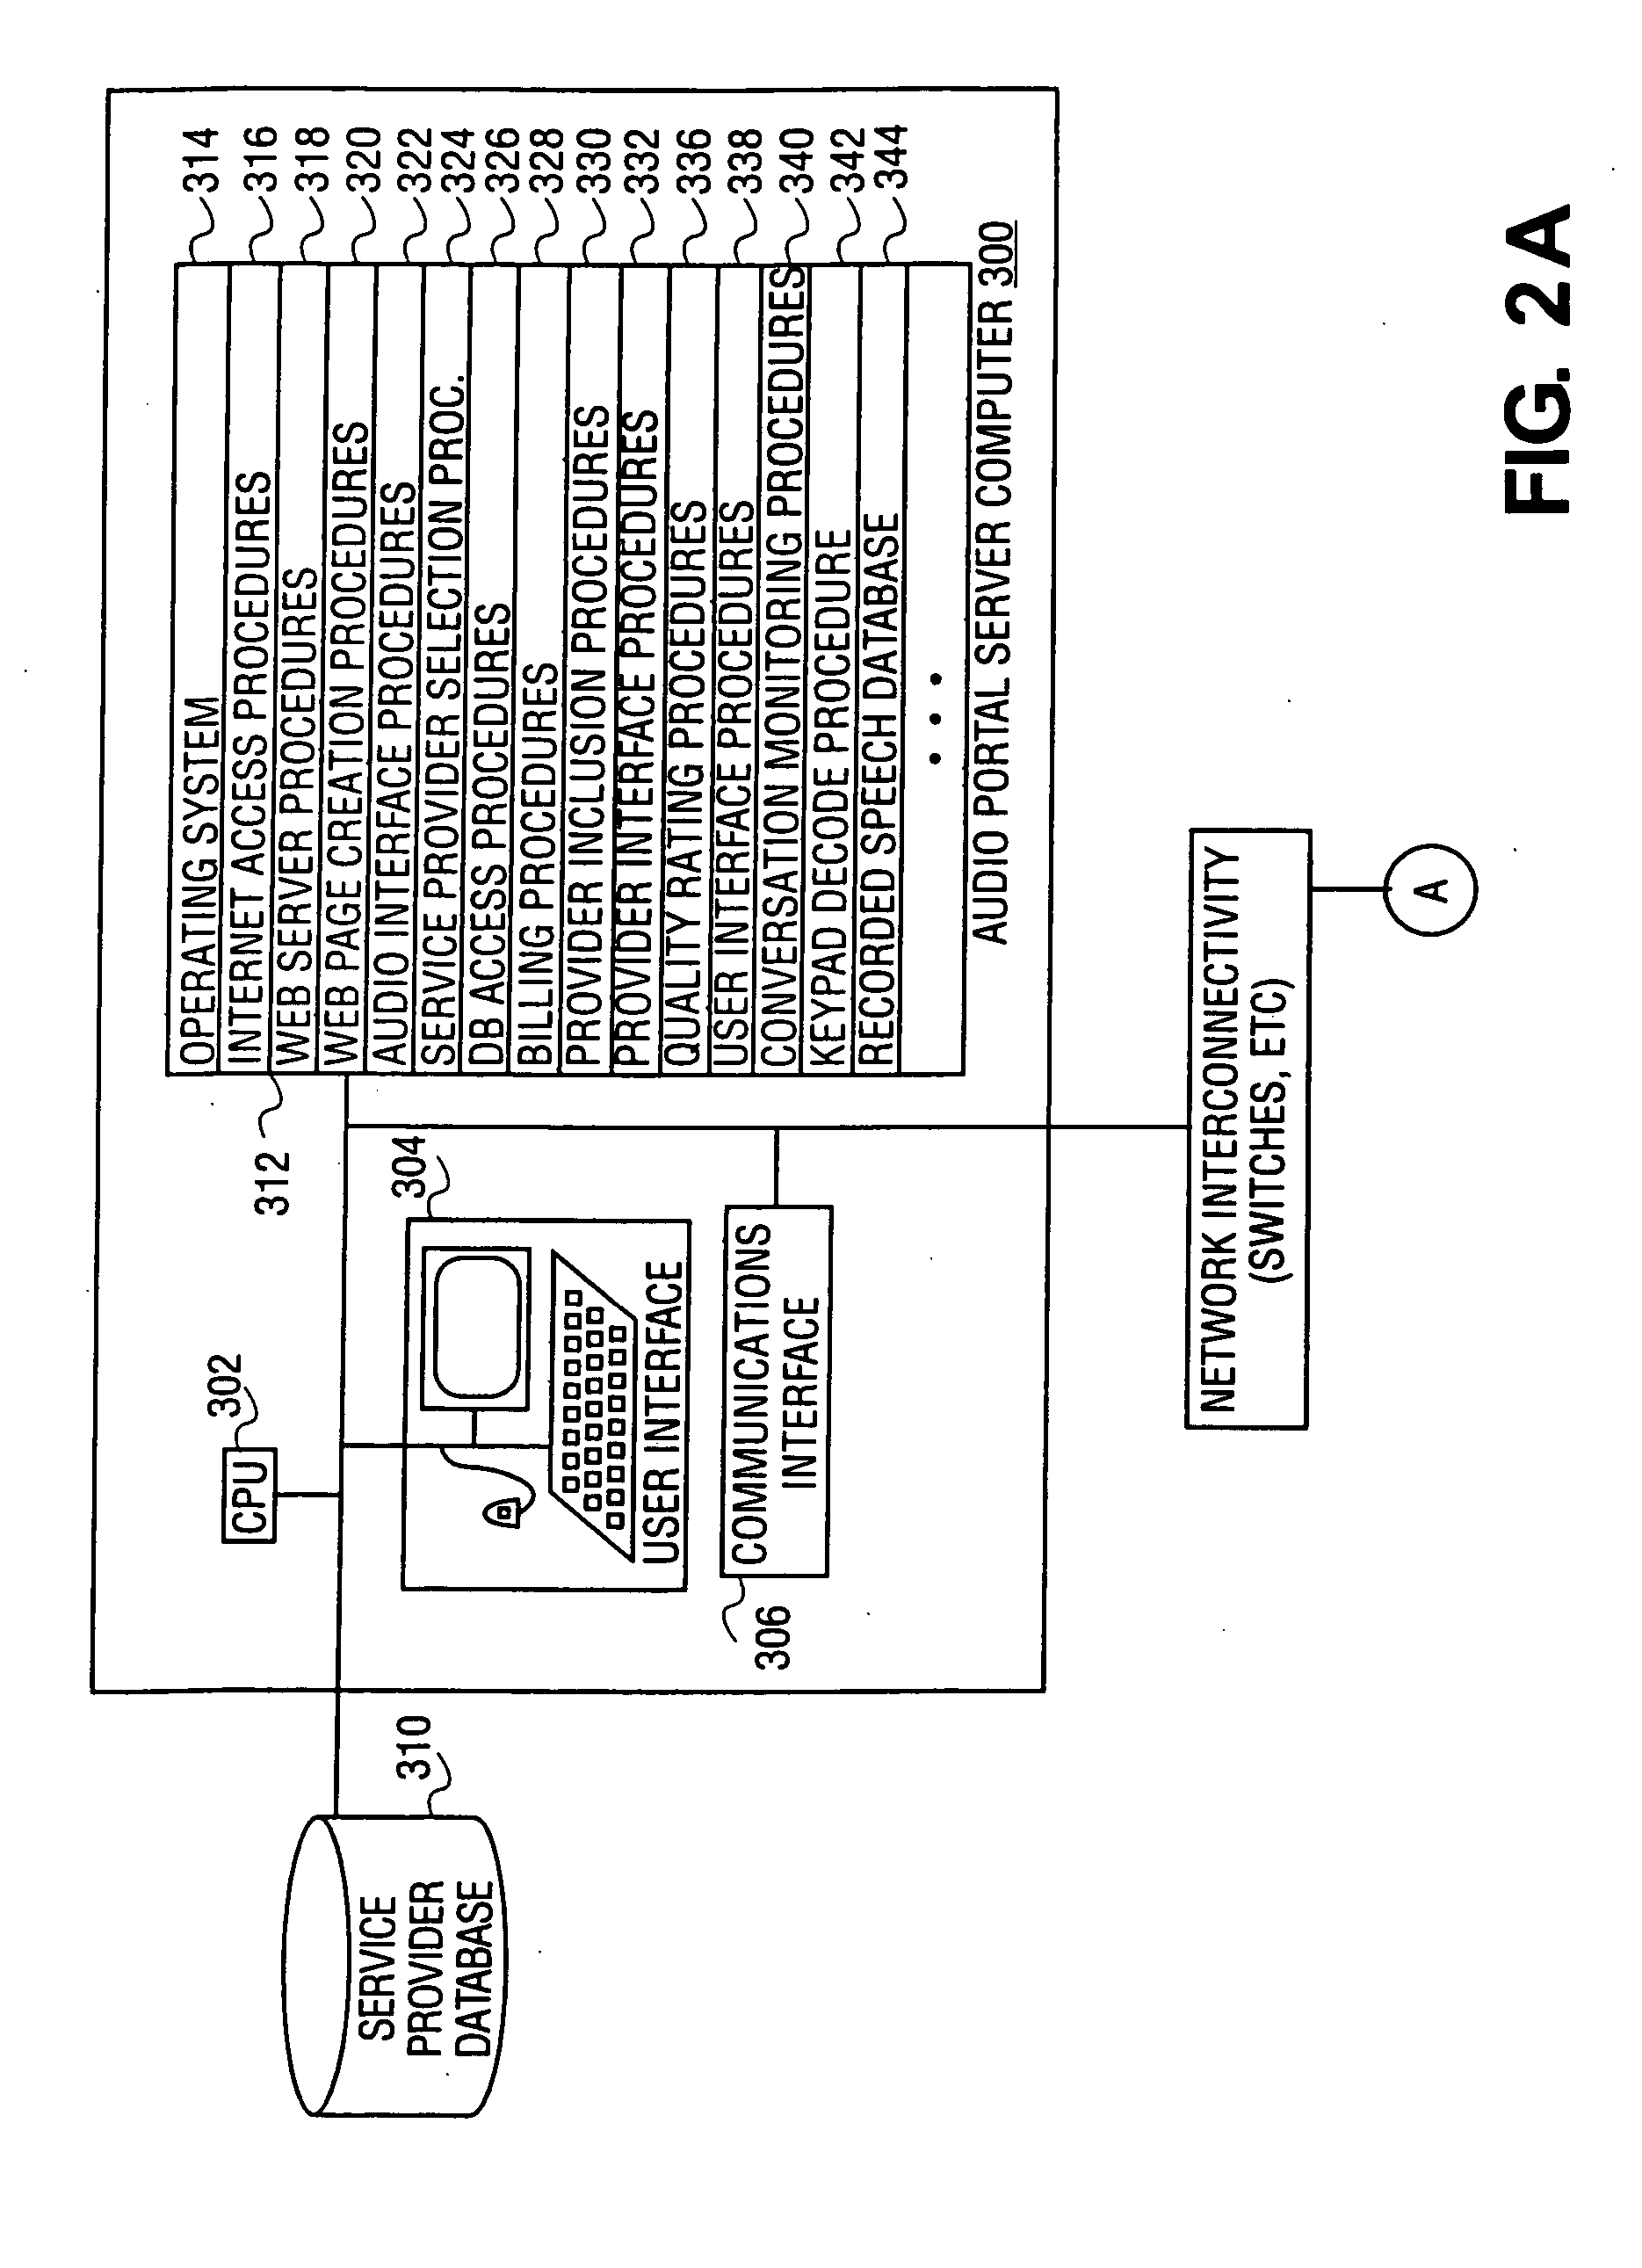 Method and system to connect consumers to information